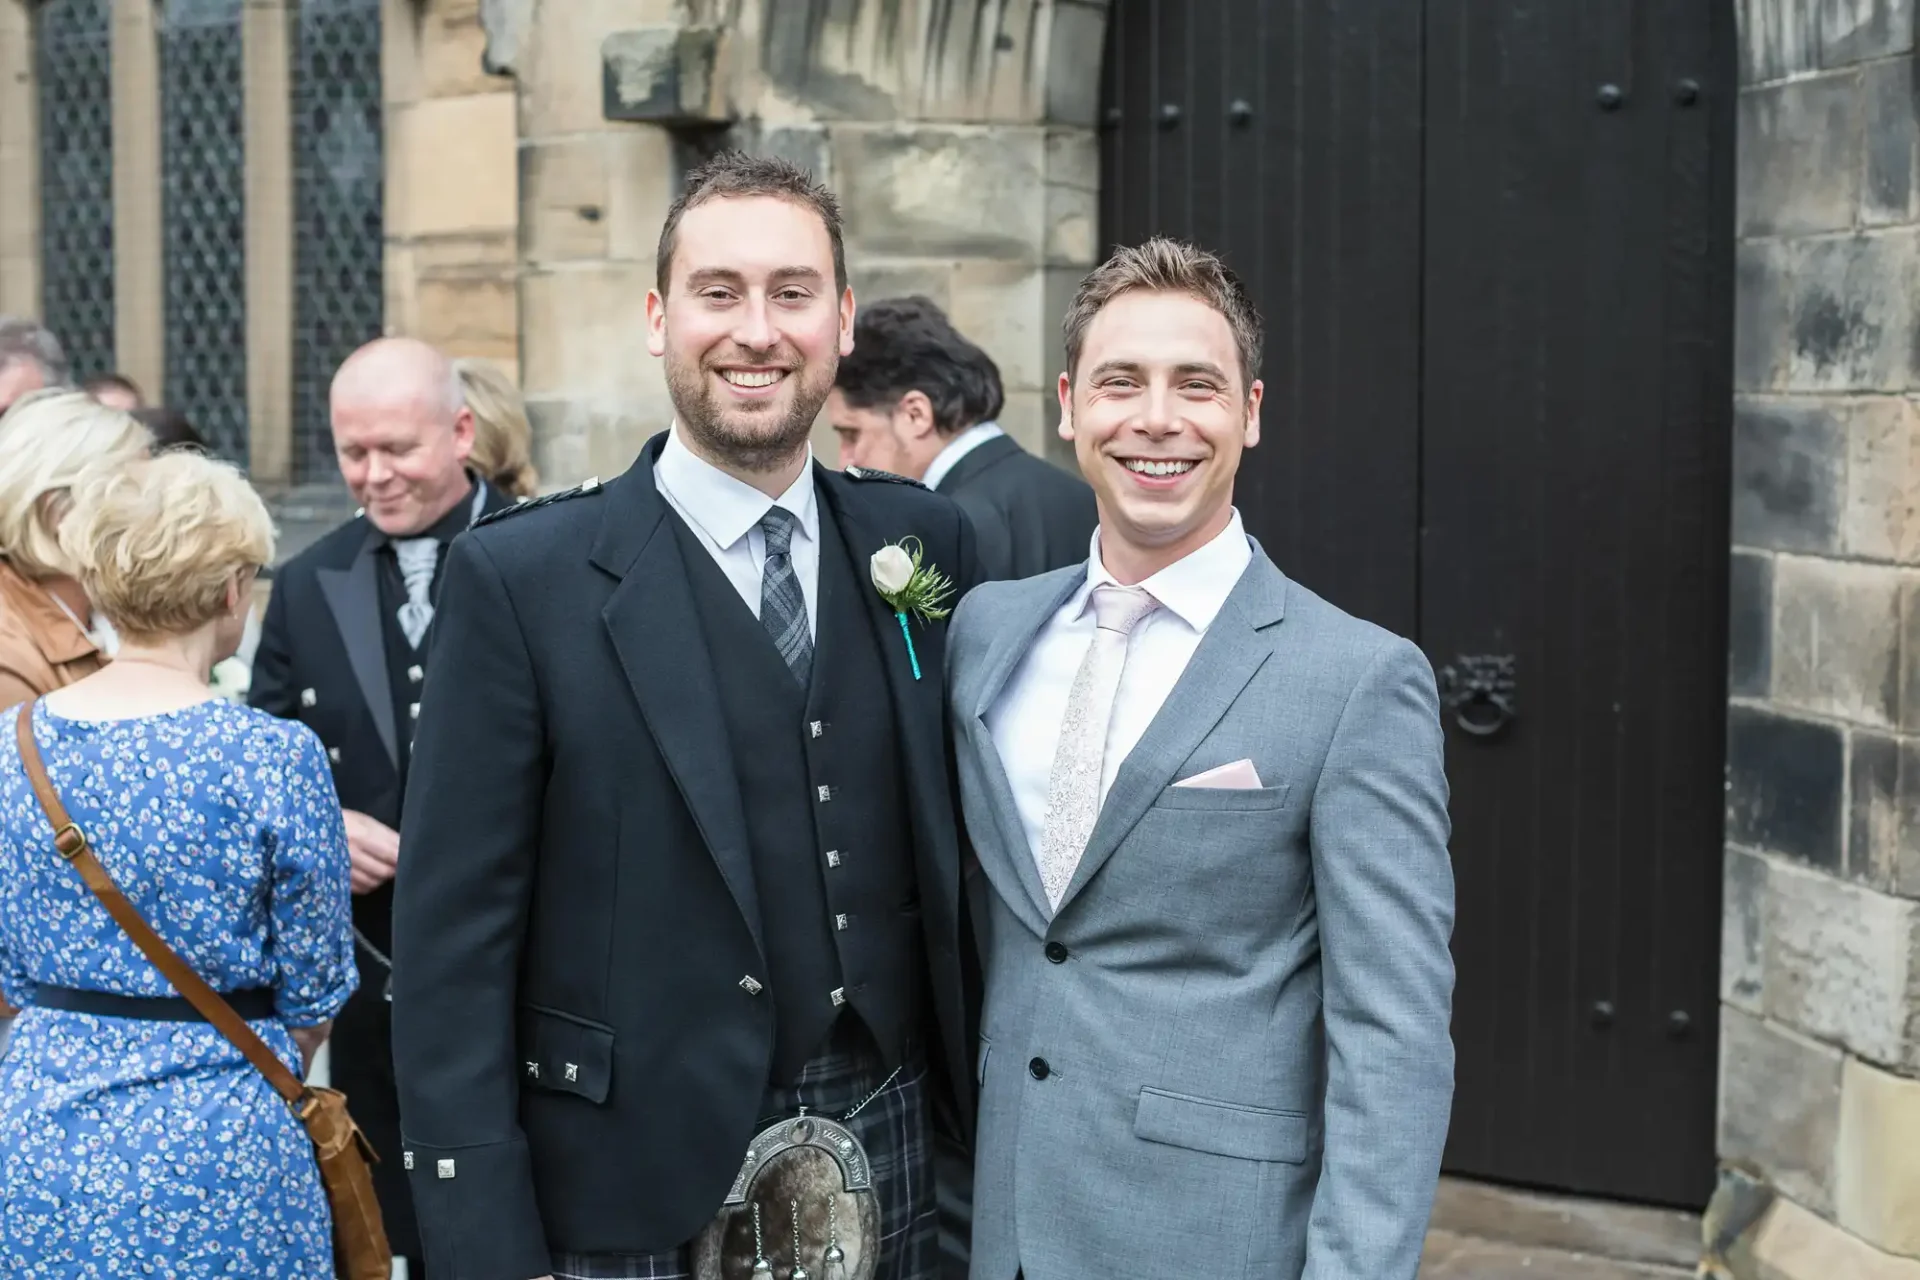 Two smiling men, one in a kilt and the other in a suit, standing together at a social gathering outside a building with a black door.